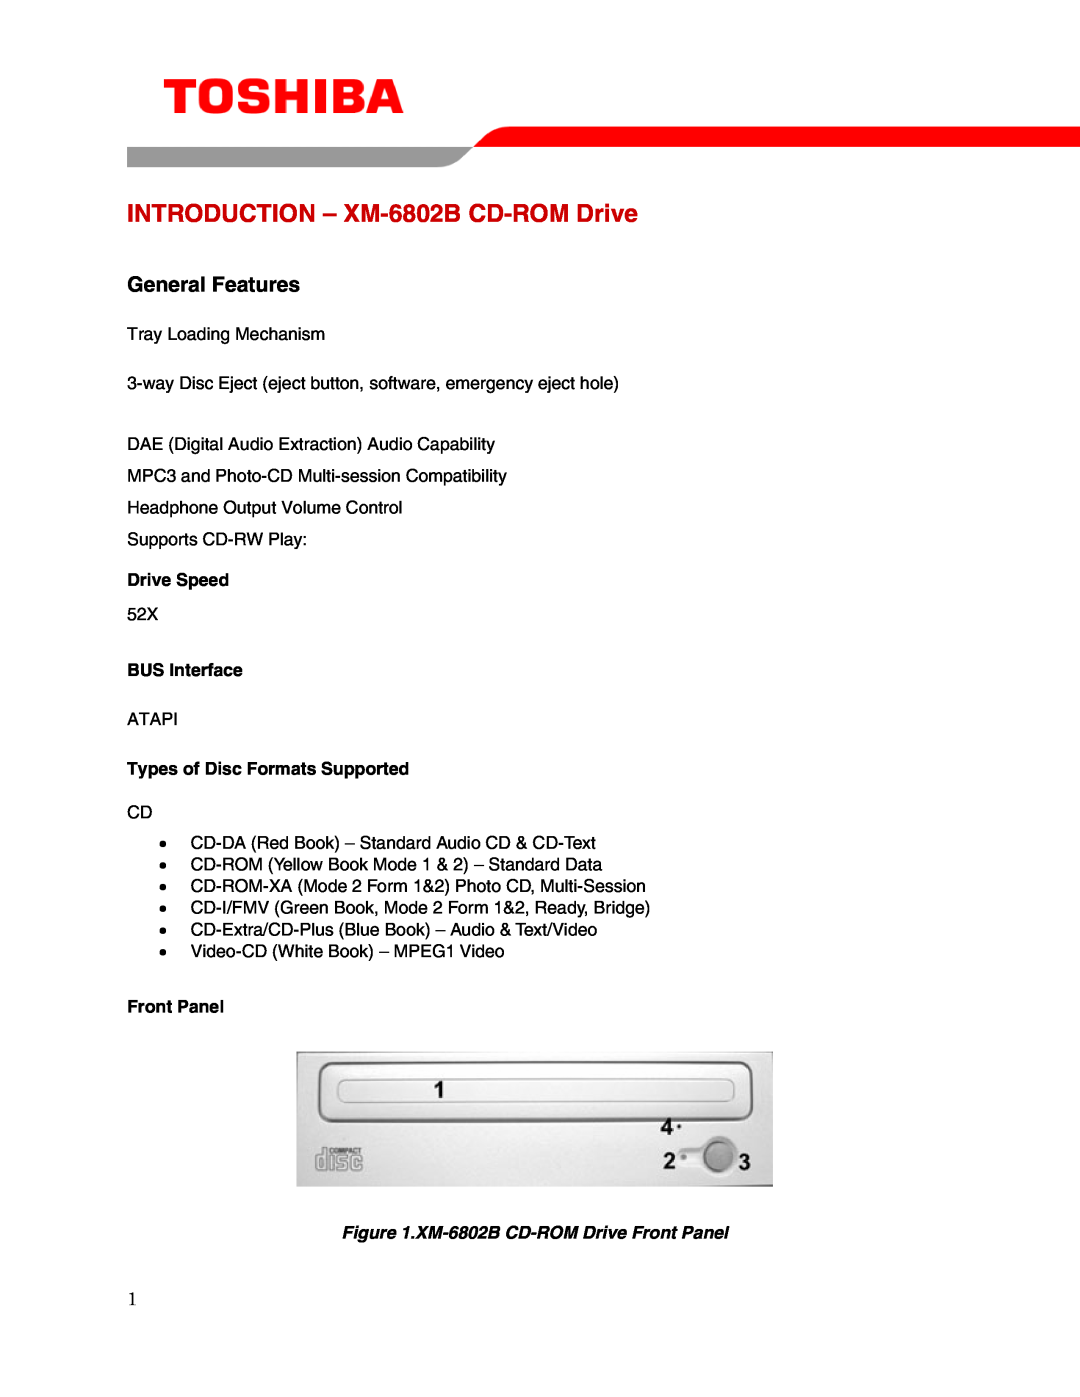 Toshiba user manual INTRODUCTION - XM-6802B CD-ROM Drive, General Features, Drive Speed, BUS Interface, Front Panel 